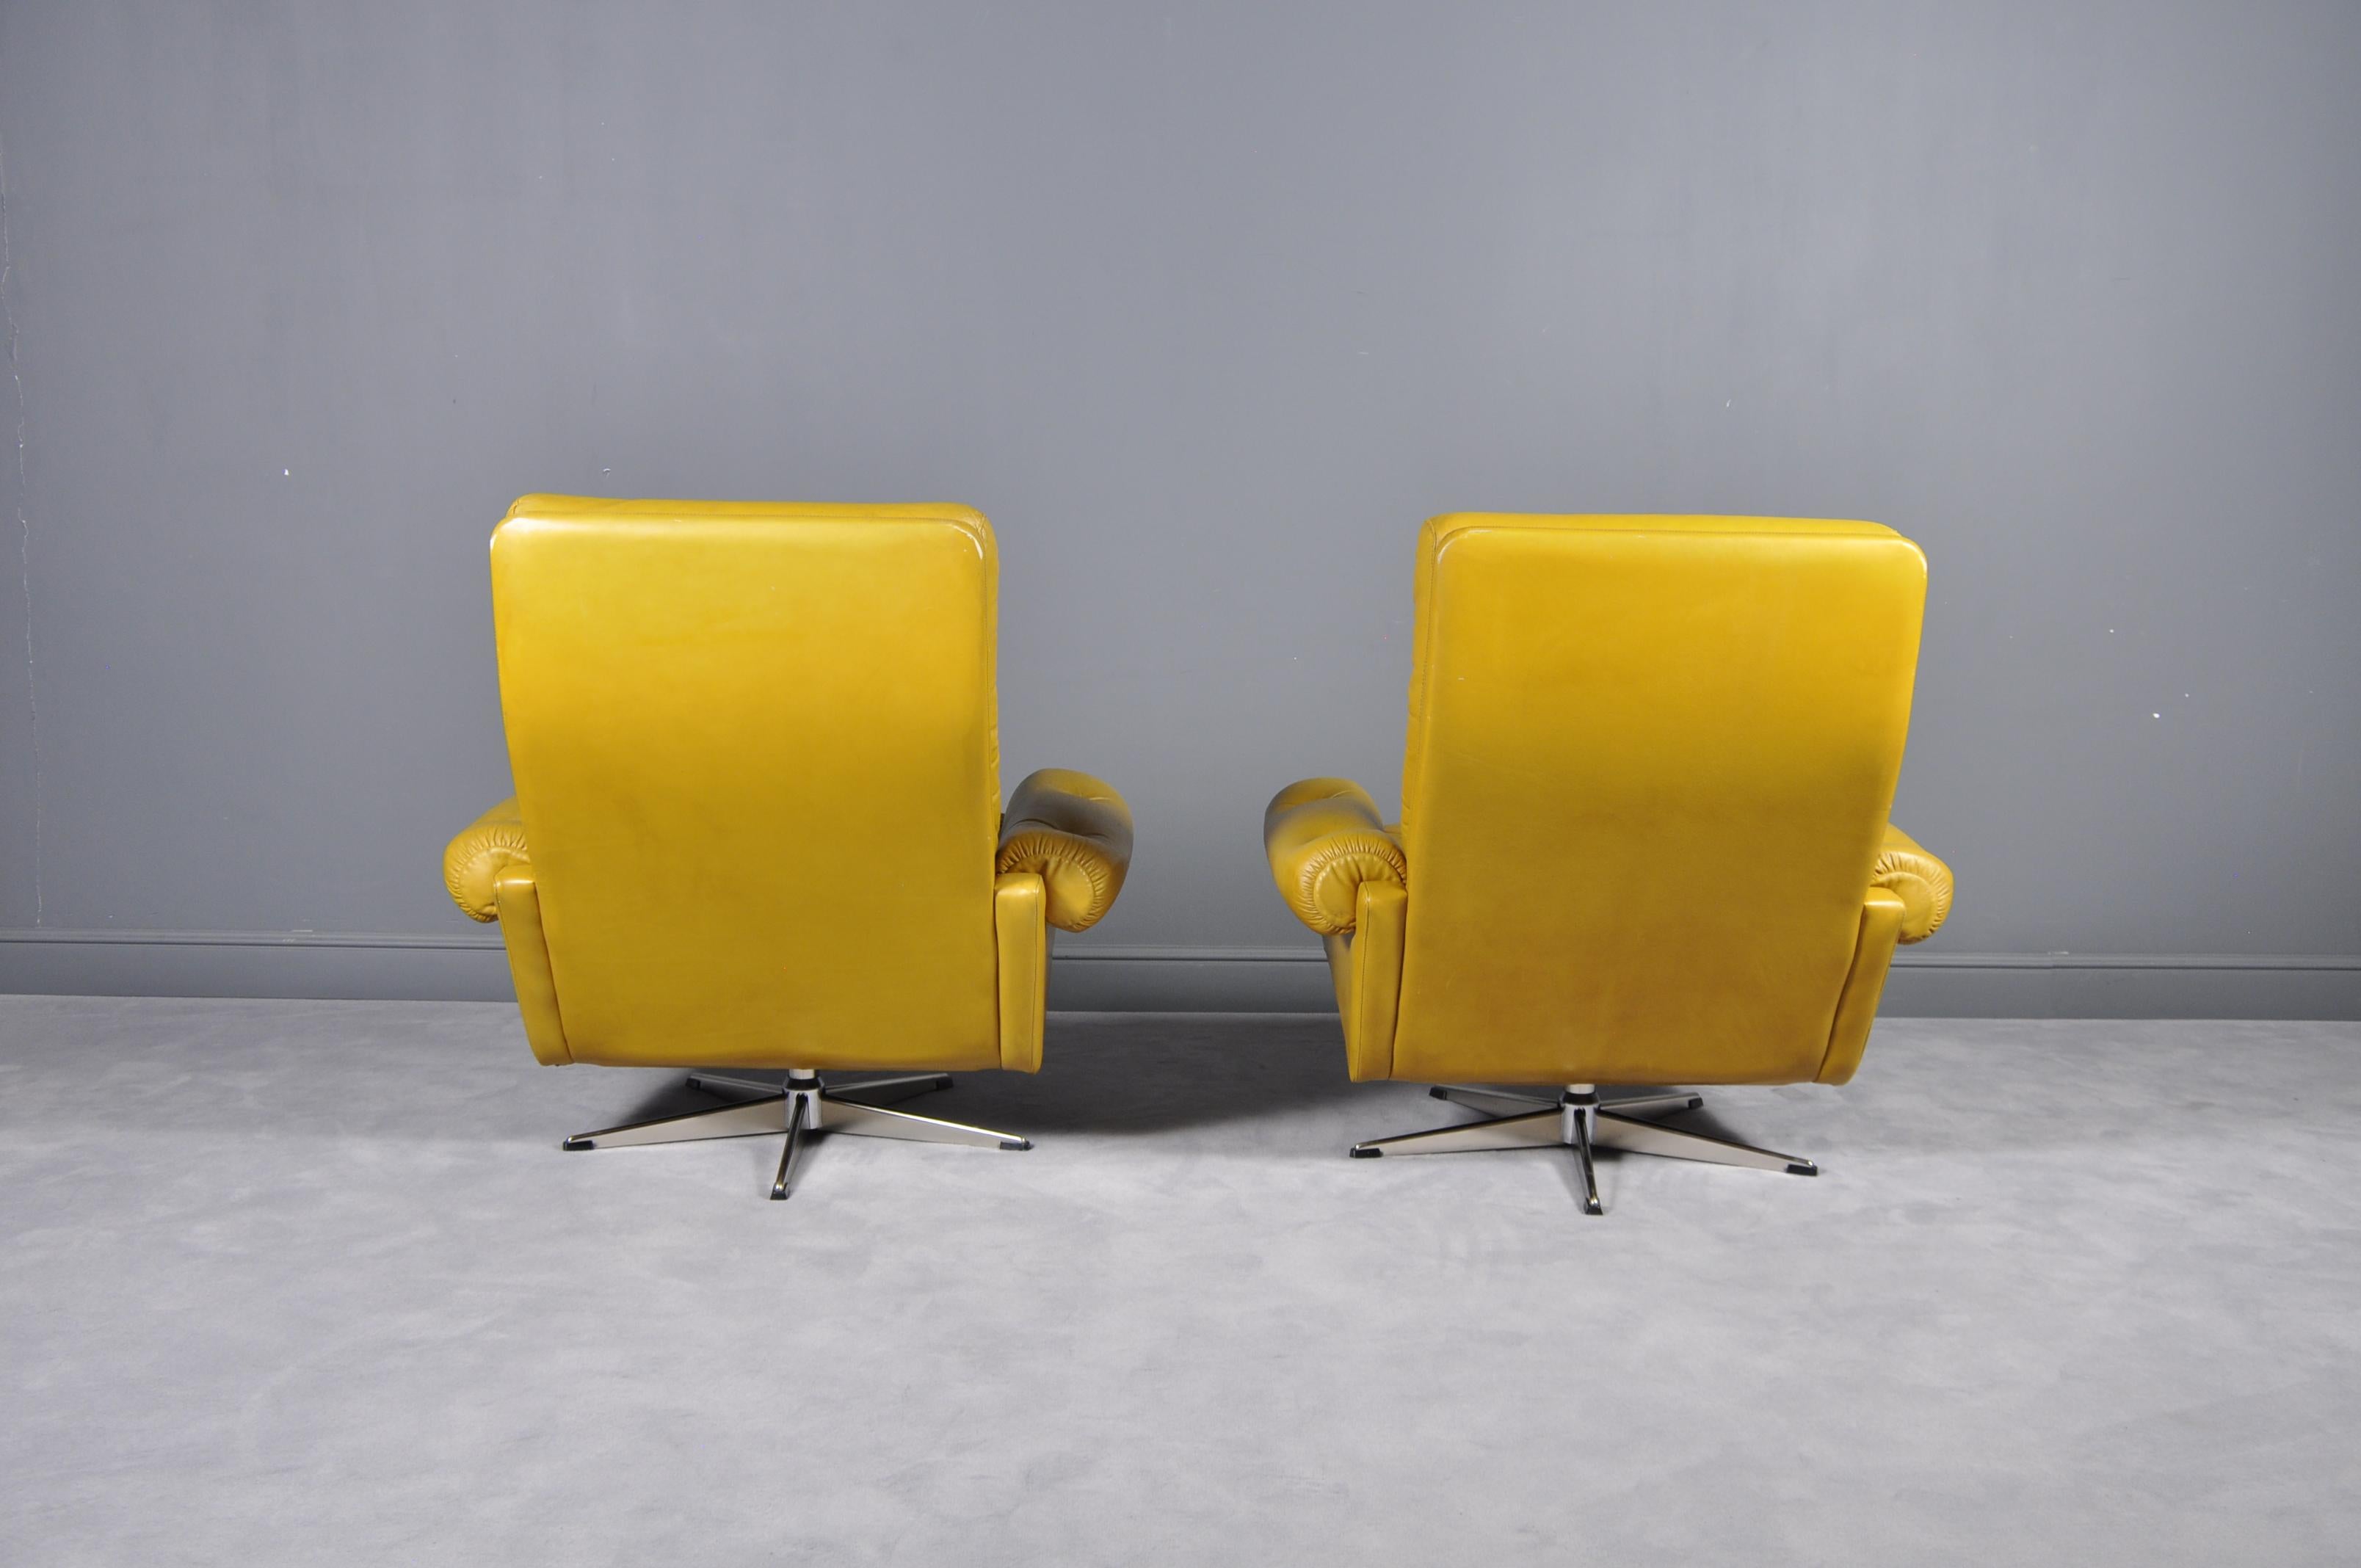 Leather Set of Two Swedish Swivel Chairs from Lystolet, Sweden, 1975